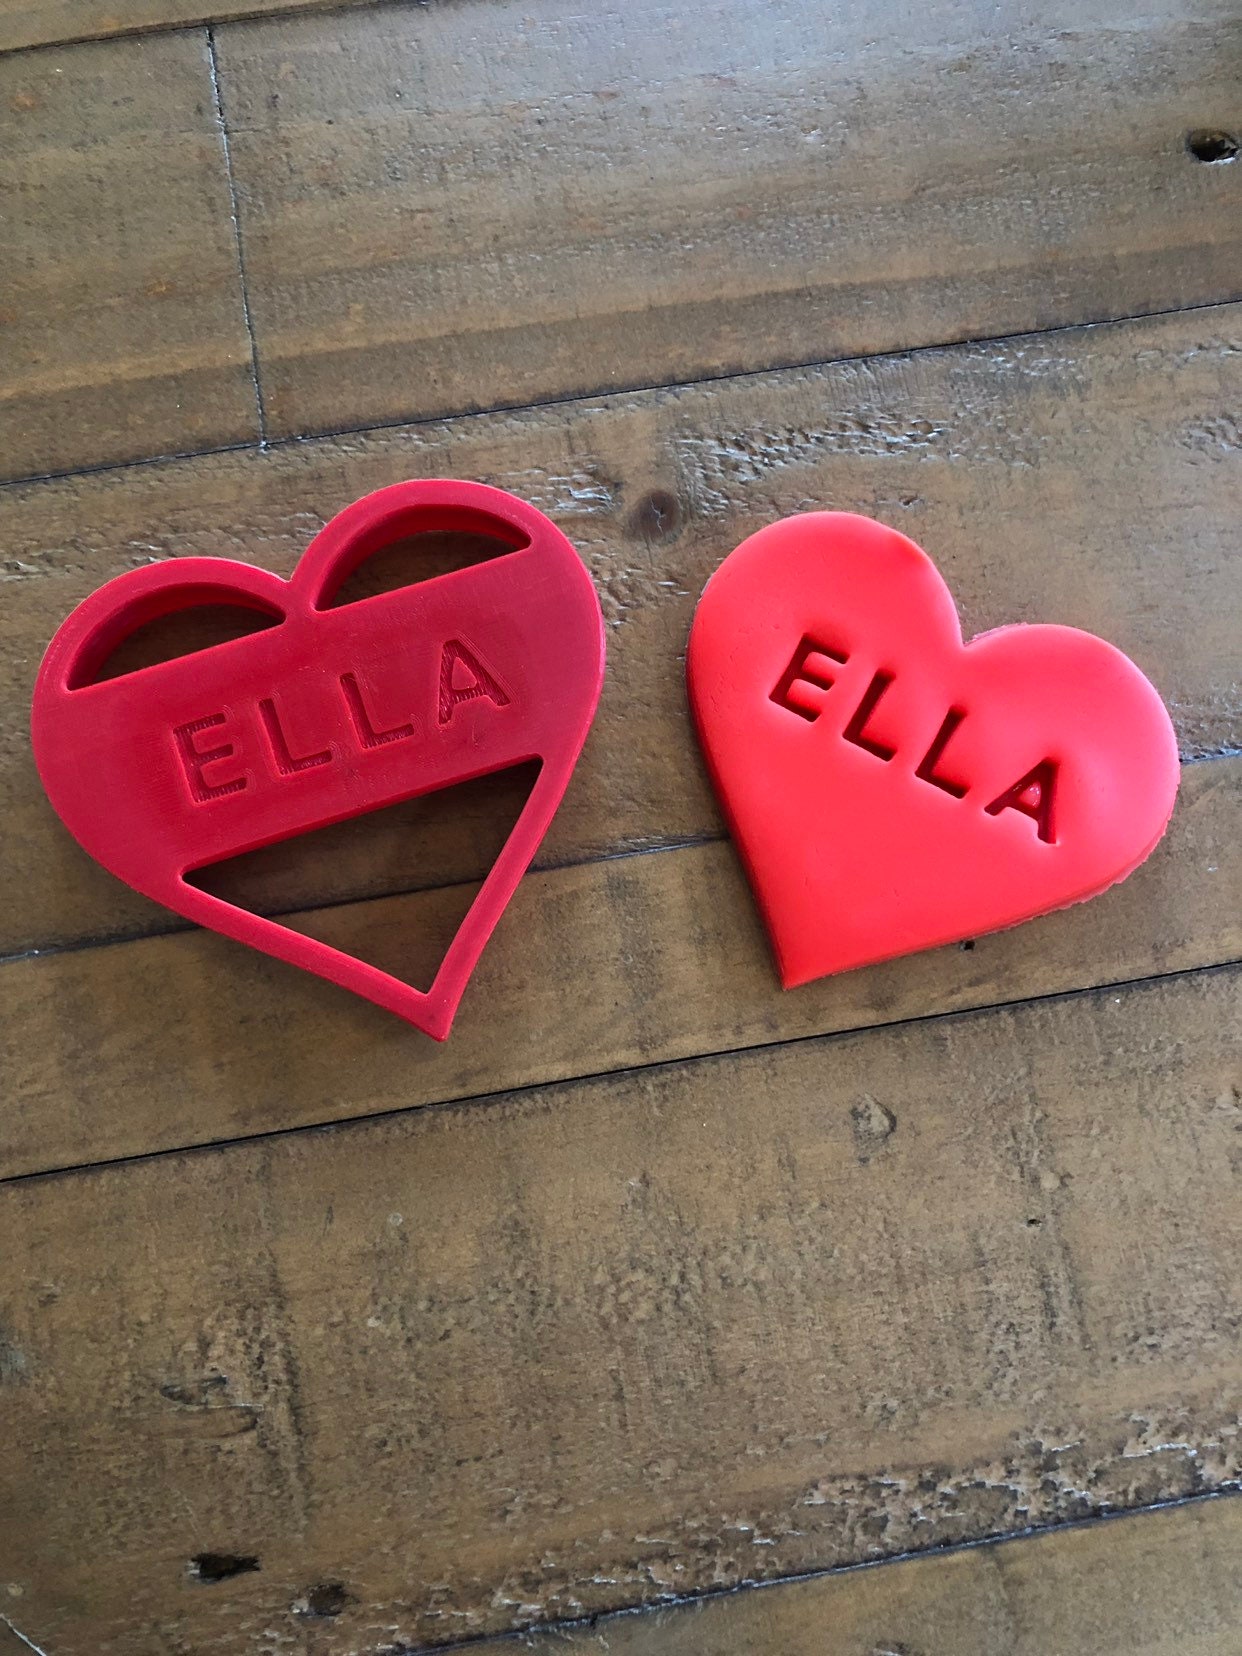 596. Conversation Hearts, Heart Cookie Cutters, Valentine's Day Cookie  Hearts, Wedding, Engagement, Personalized, 3D Printed, Fondant Cutter, Clay  Cutter